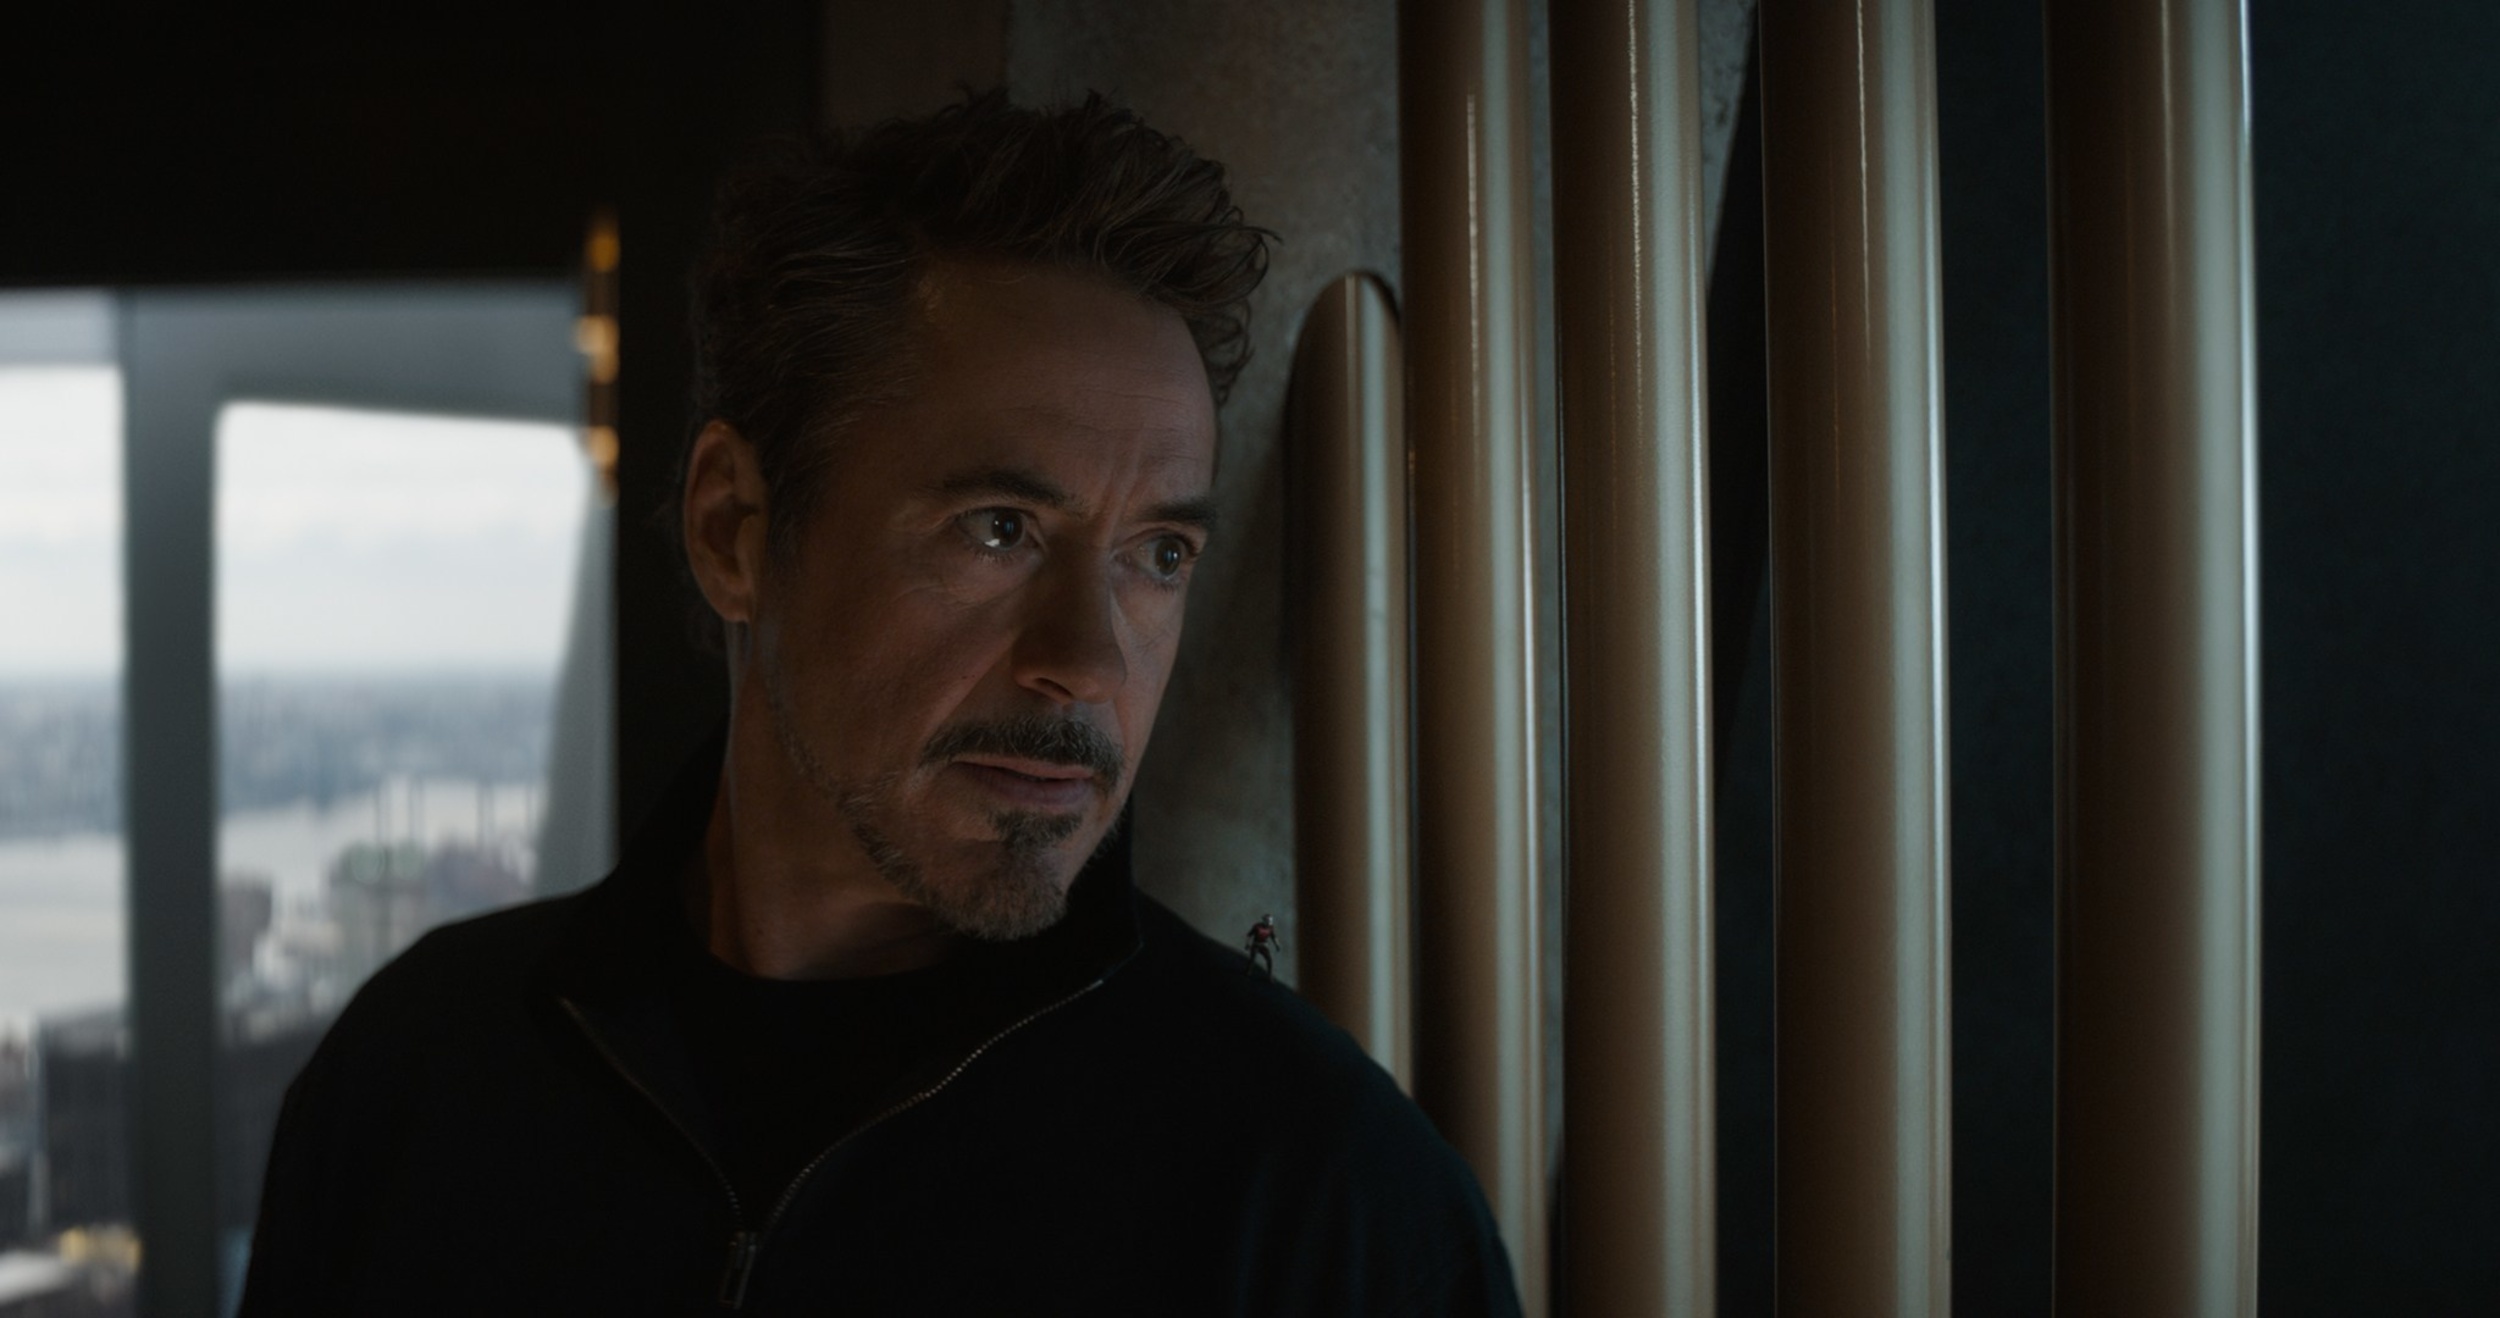 <p>Tony Stark finds a new purpose in his and Pepper’s daughter Morgan. Morgan is played by child actress Lexi Rabe, but there were plans to see an older Morgan as well. Katherine Langford was cast, but her scenes were cut.</p><p>You may also like: <a href='https://www.yardbarker.com/entertainment/articles/football_players_who_went_on_to_become_actors_020824/s1__29908694'>Football players who went on to become actors</a></p>